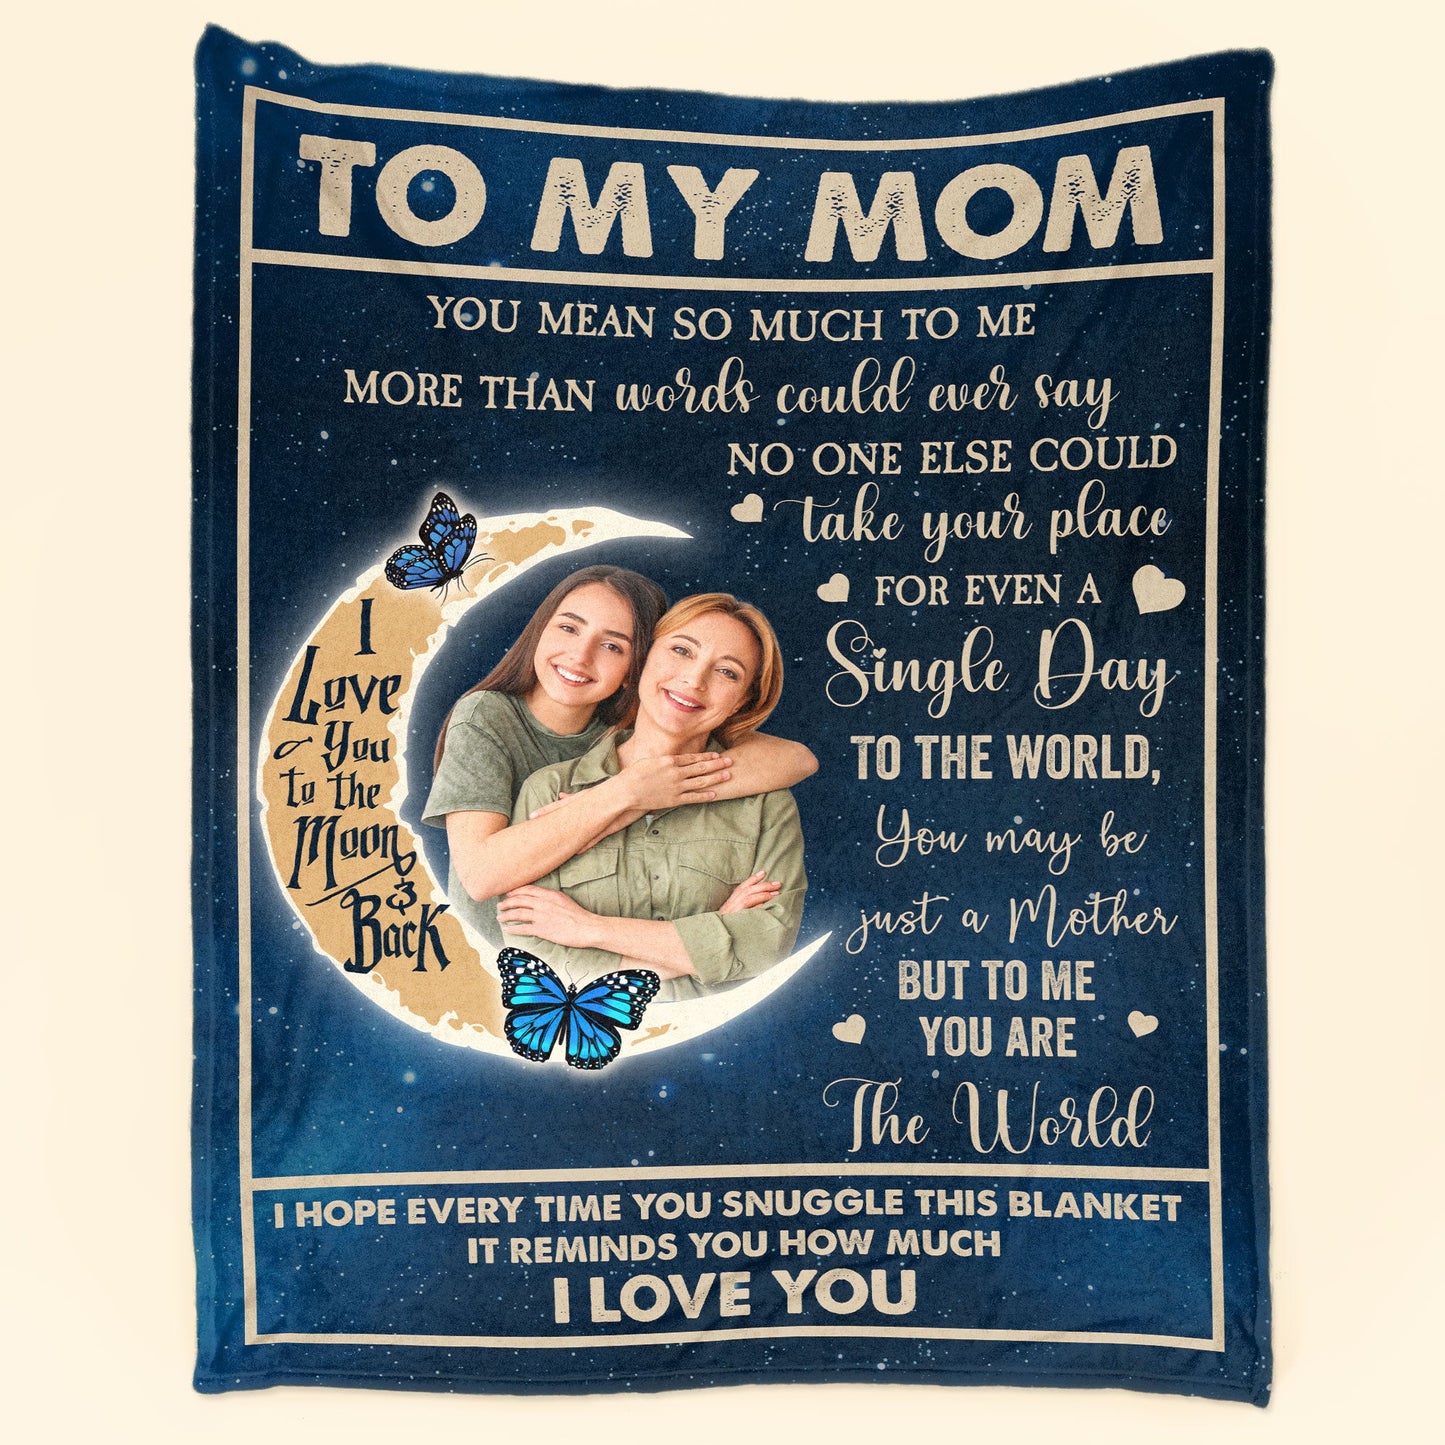 To My Mom You Are The World - Personalized Photo Blanket